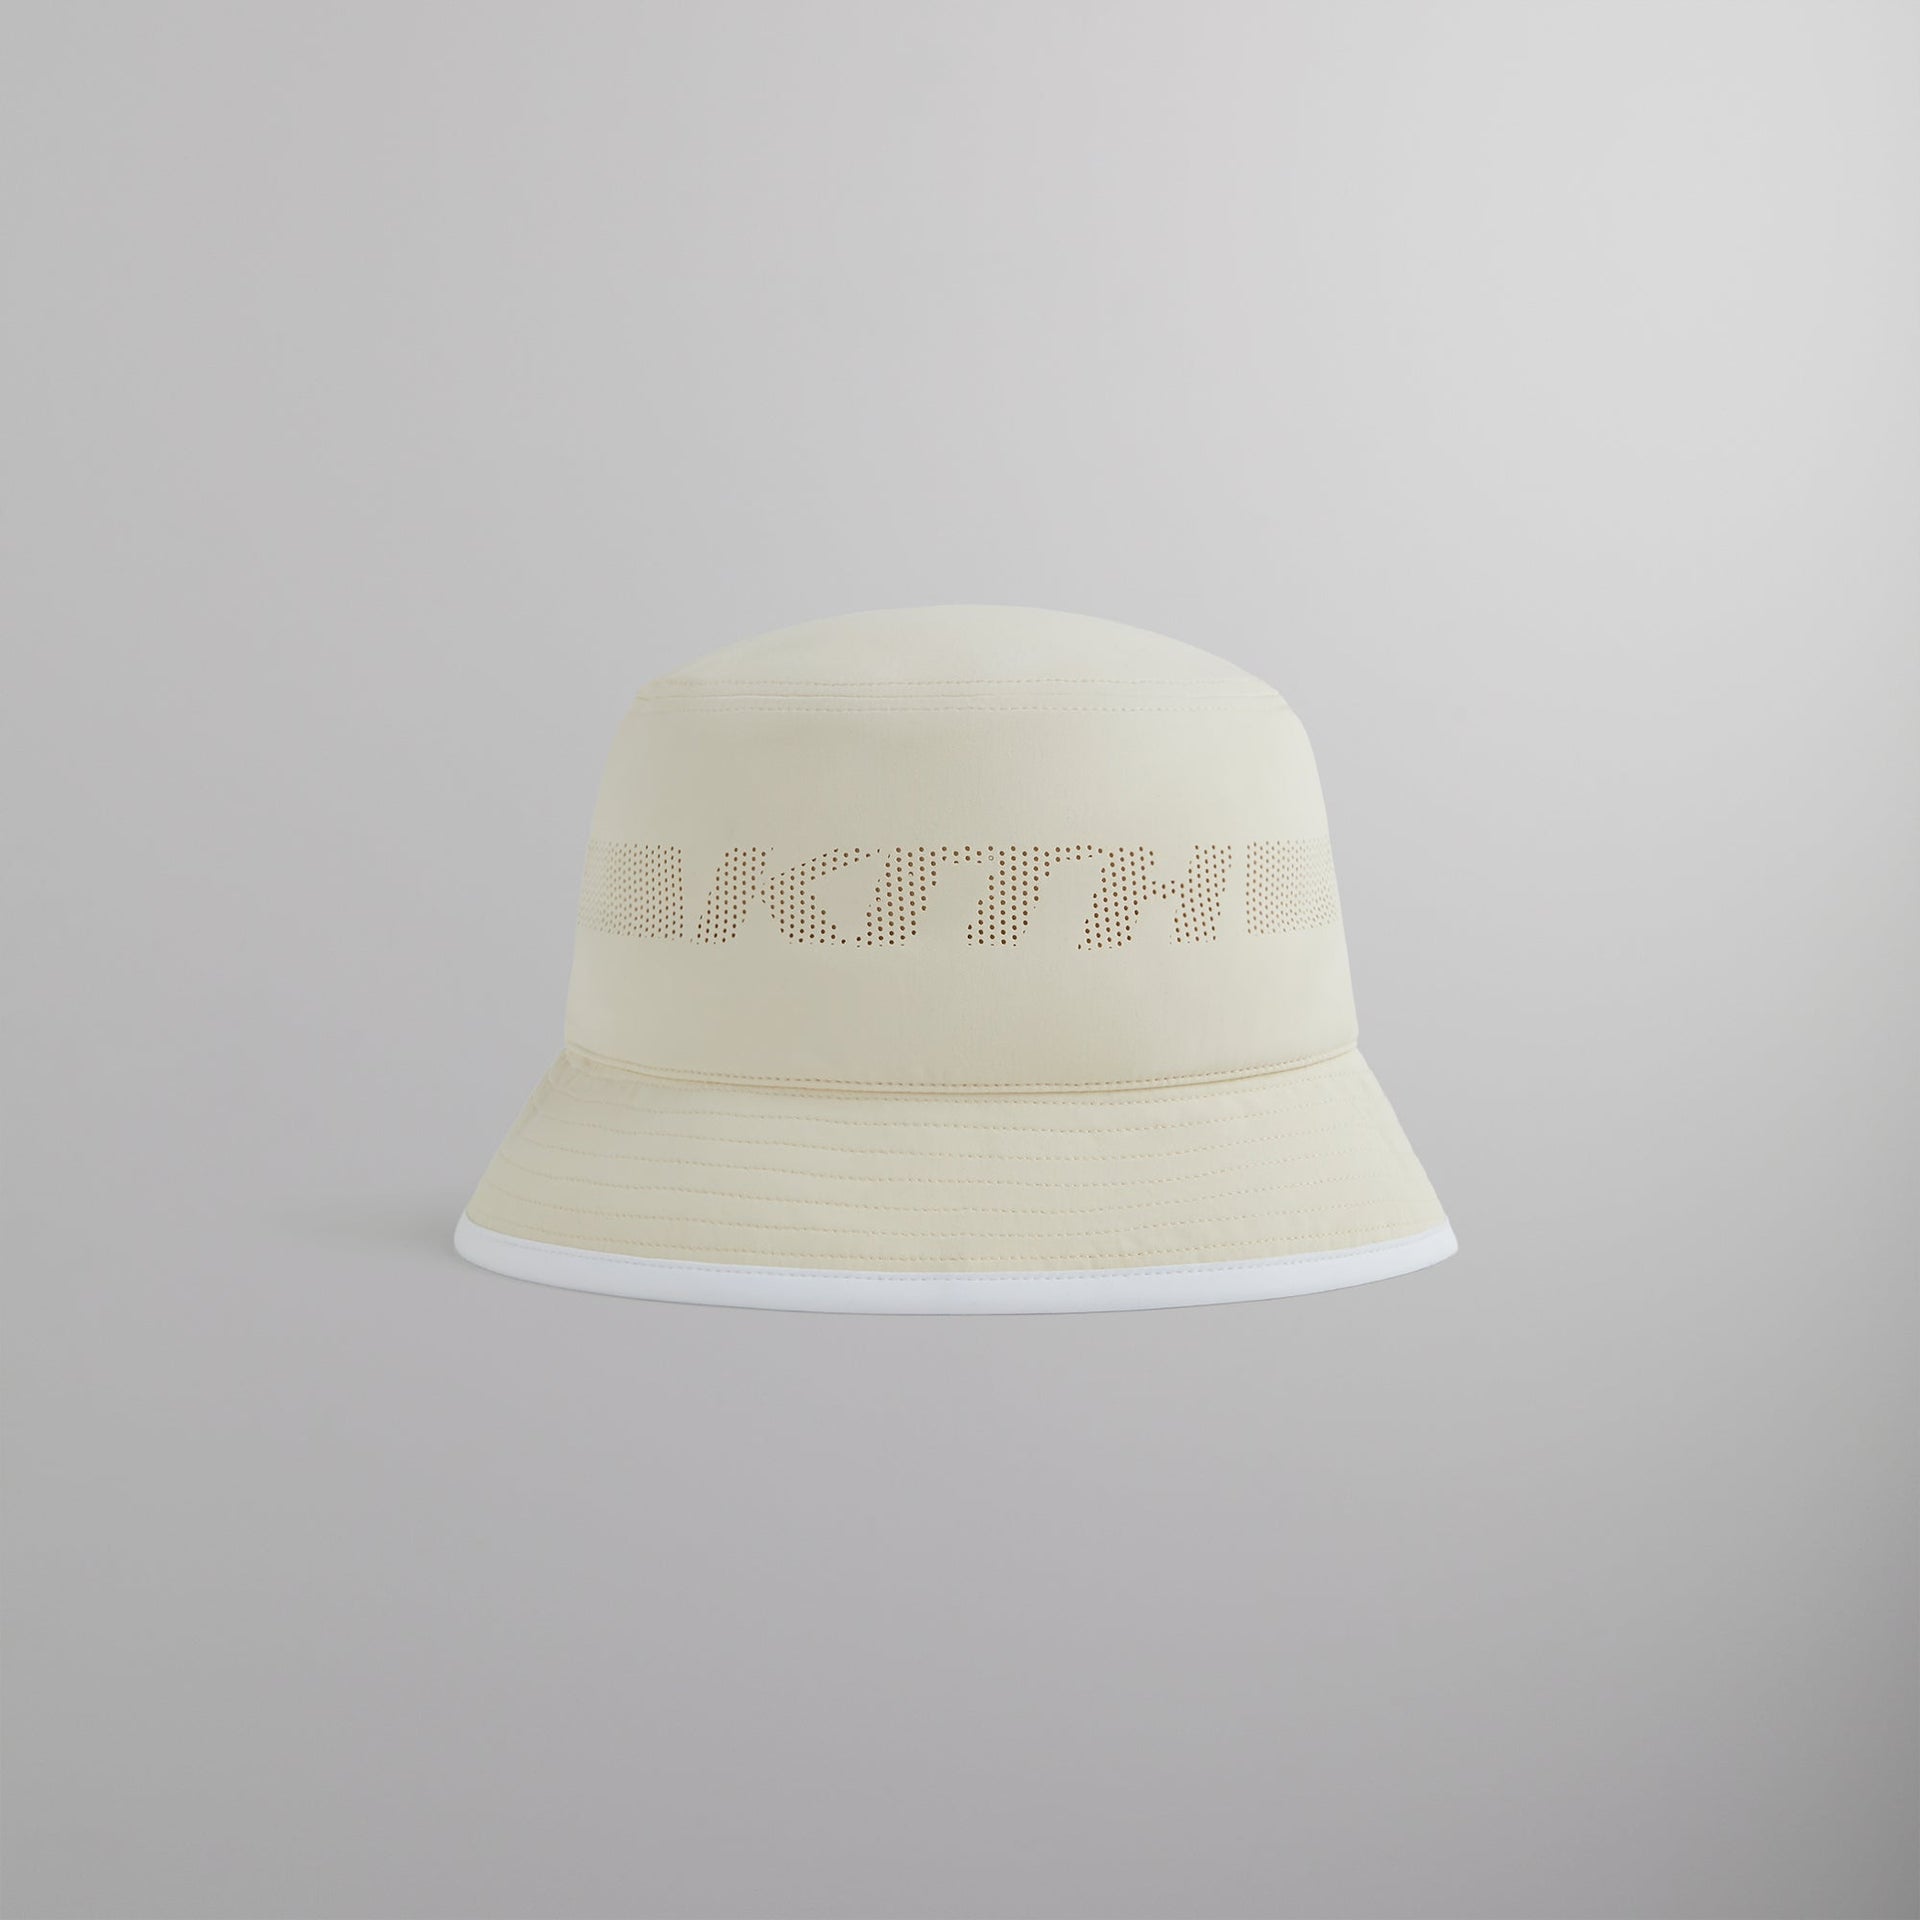 Kith for TaylorMade Perforated Bucket Hat - Rye